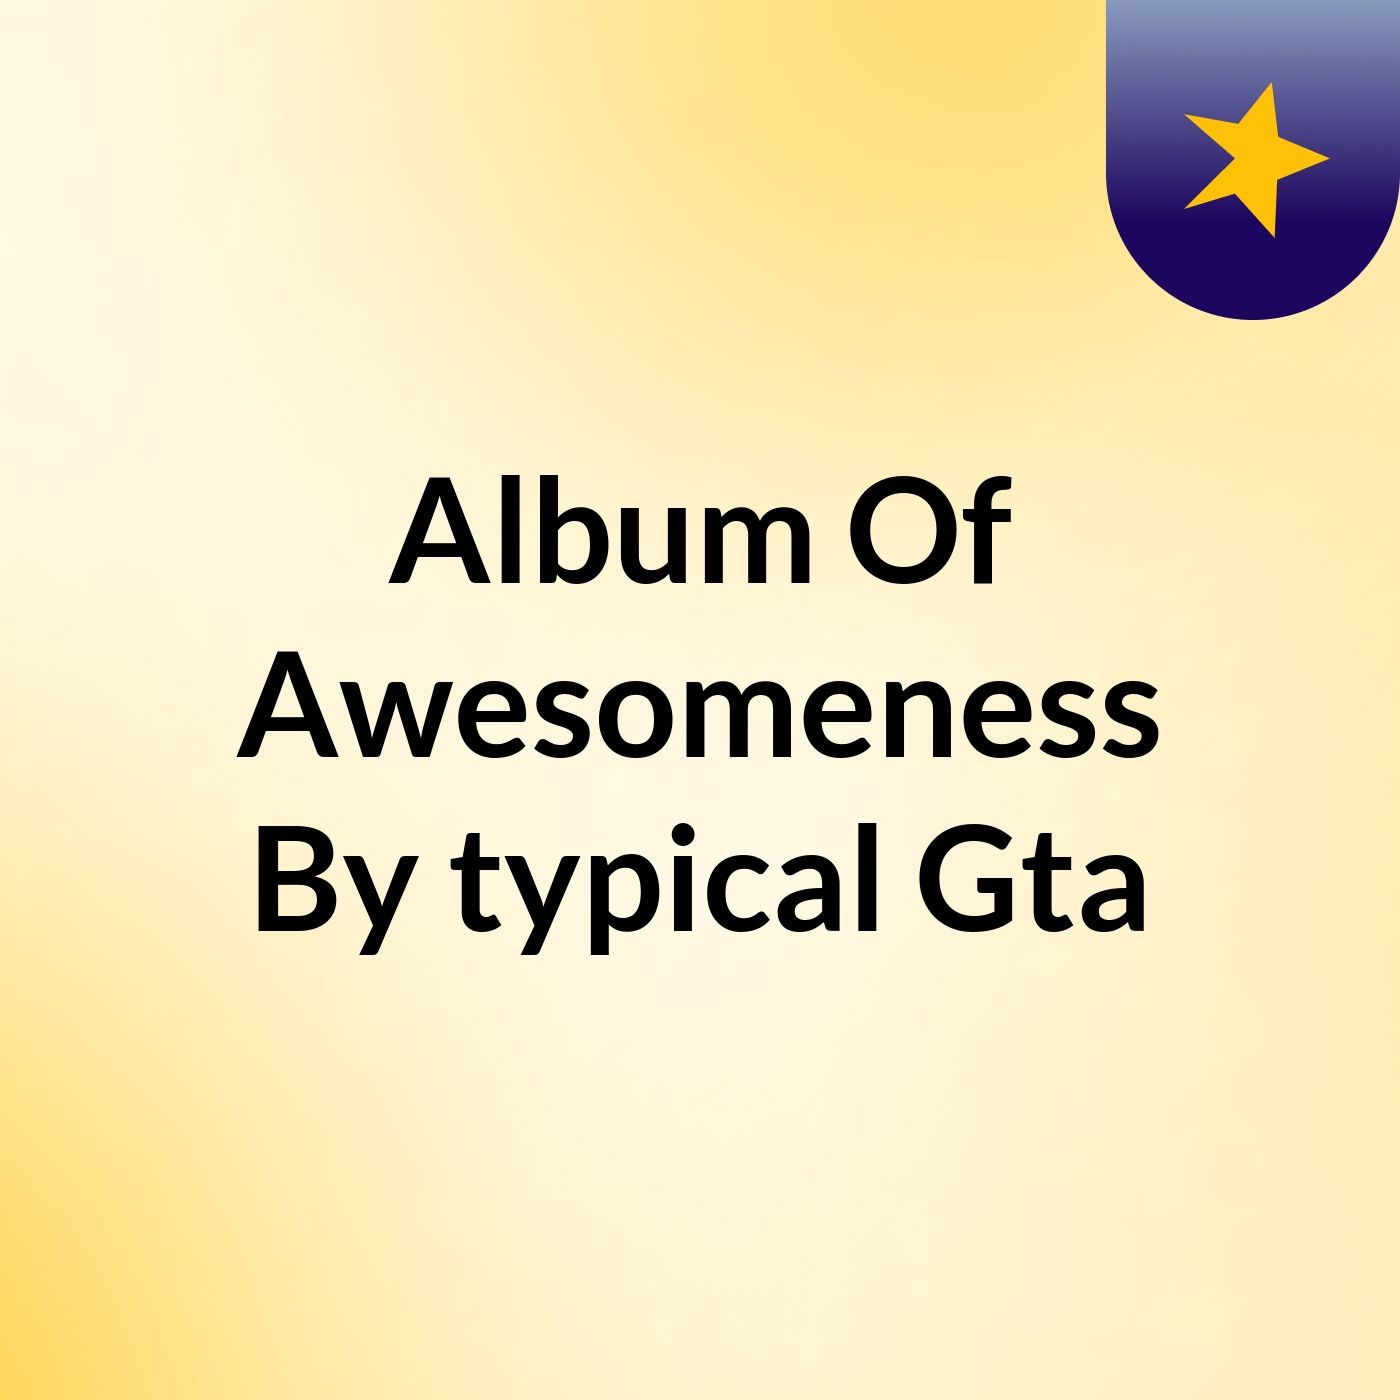 Album Of Awesomeness By typical Gta